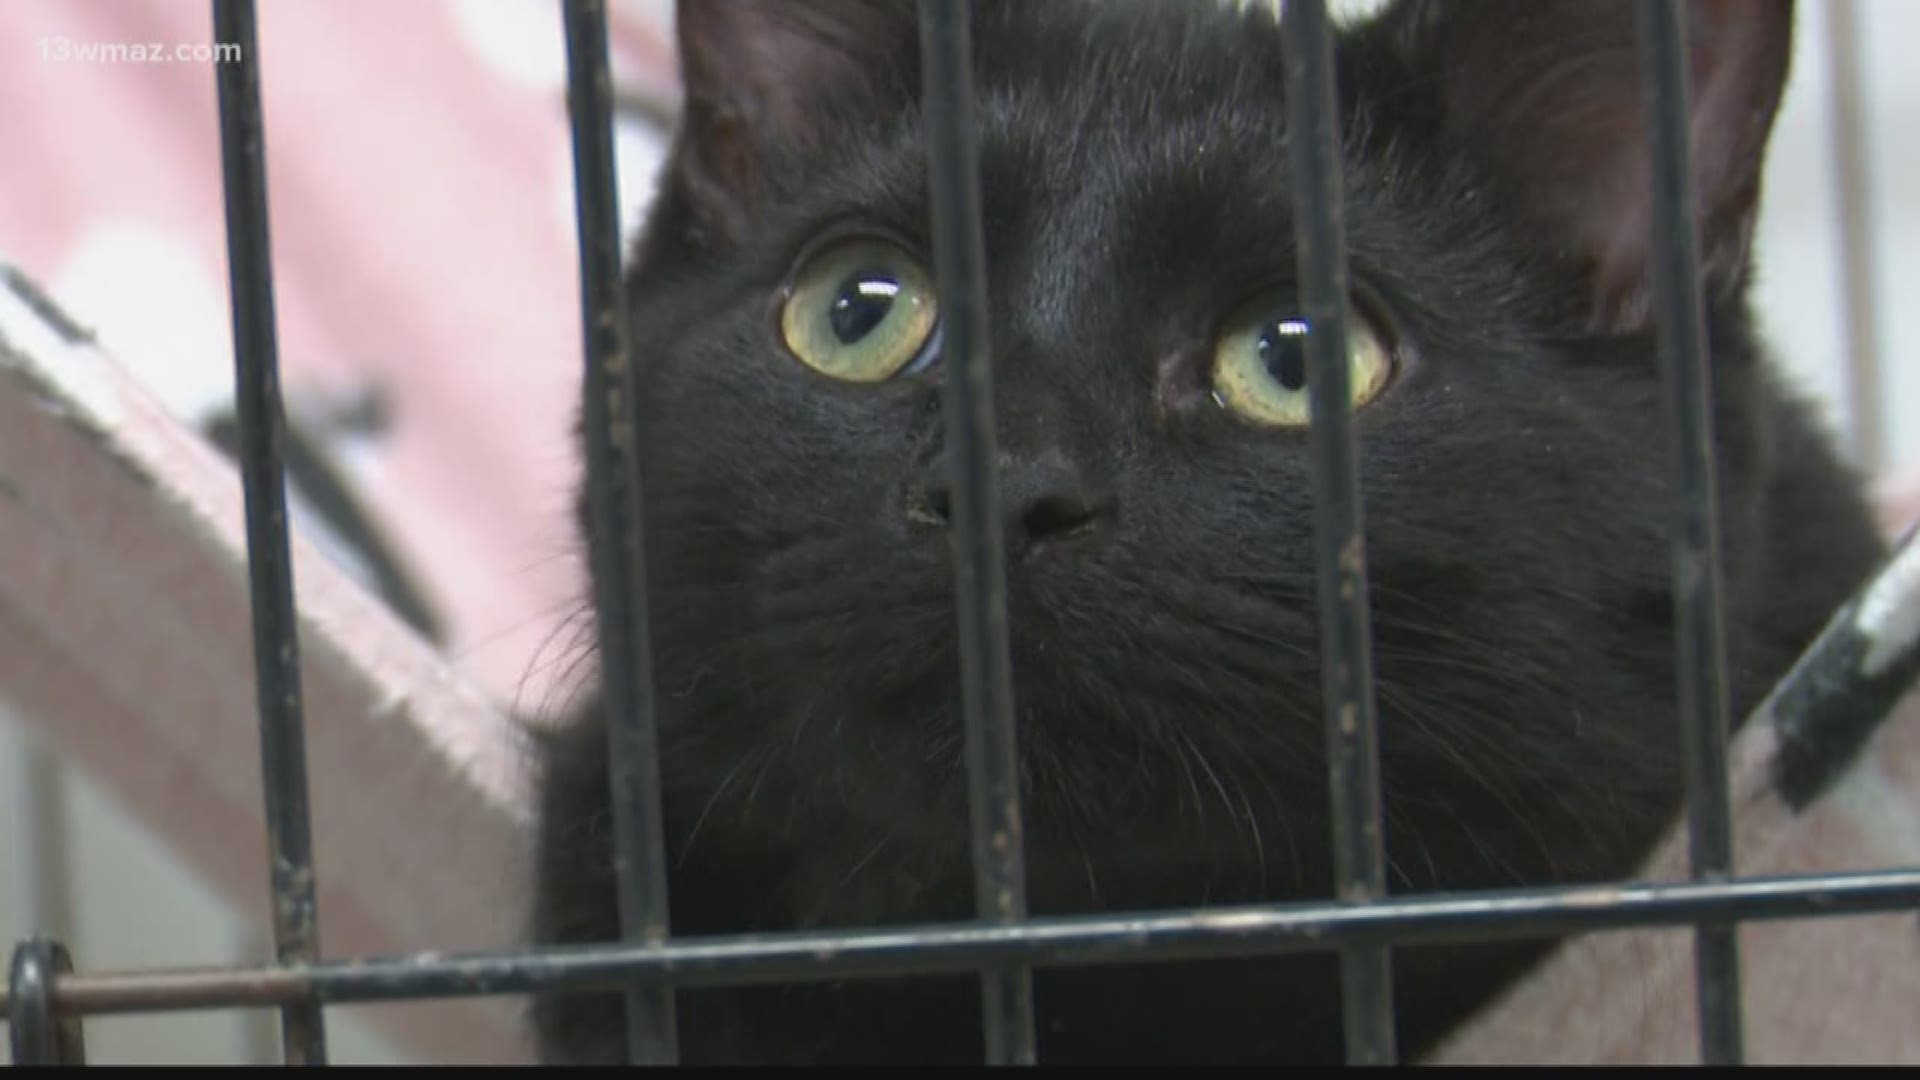 The organization says this is a critical time because people may give up their pets due to financial strains.